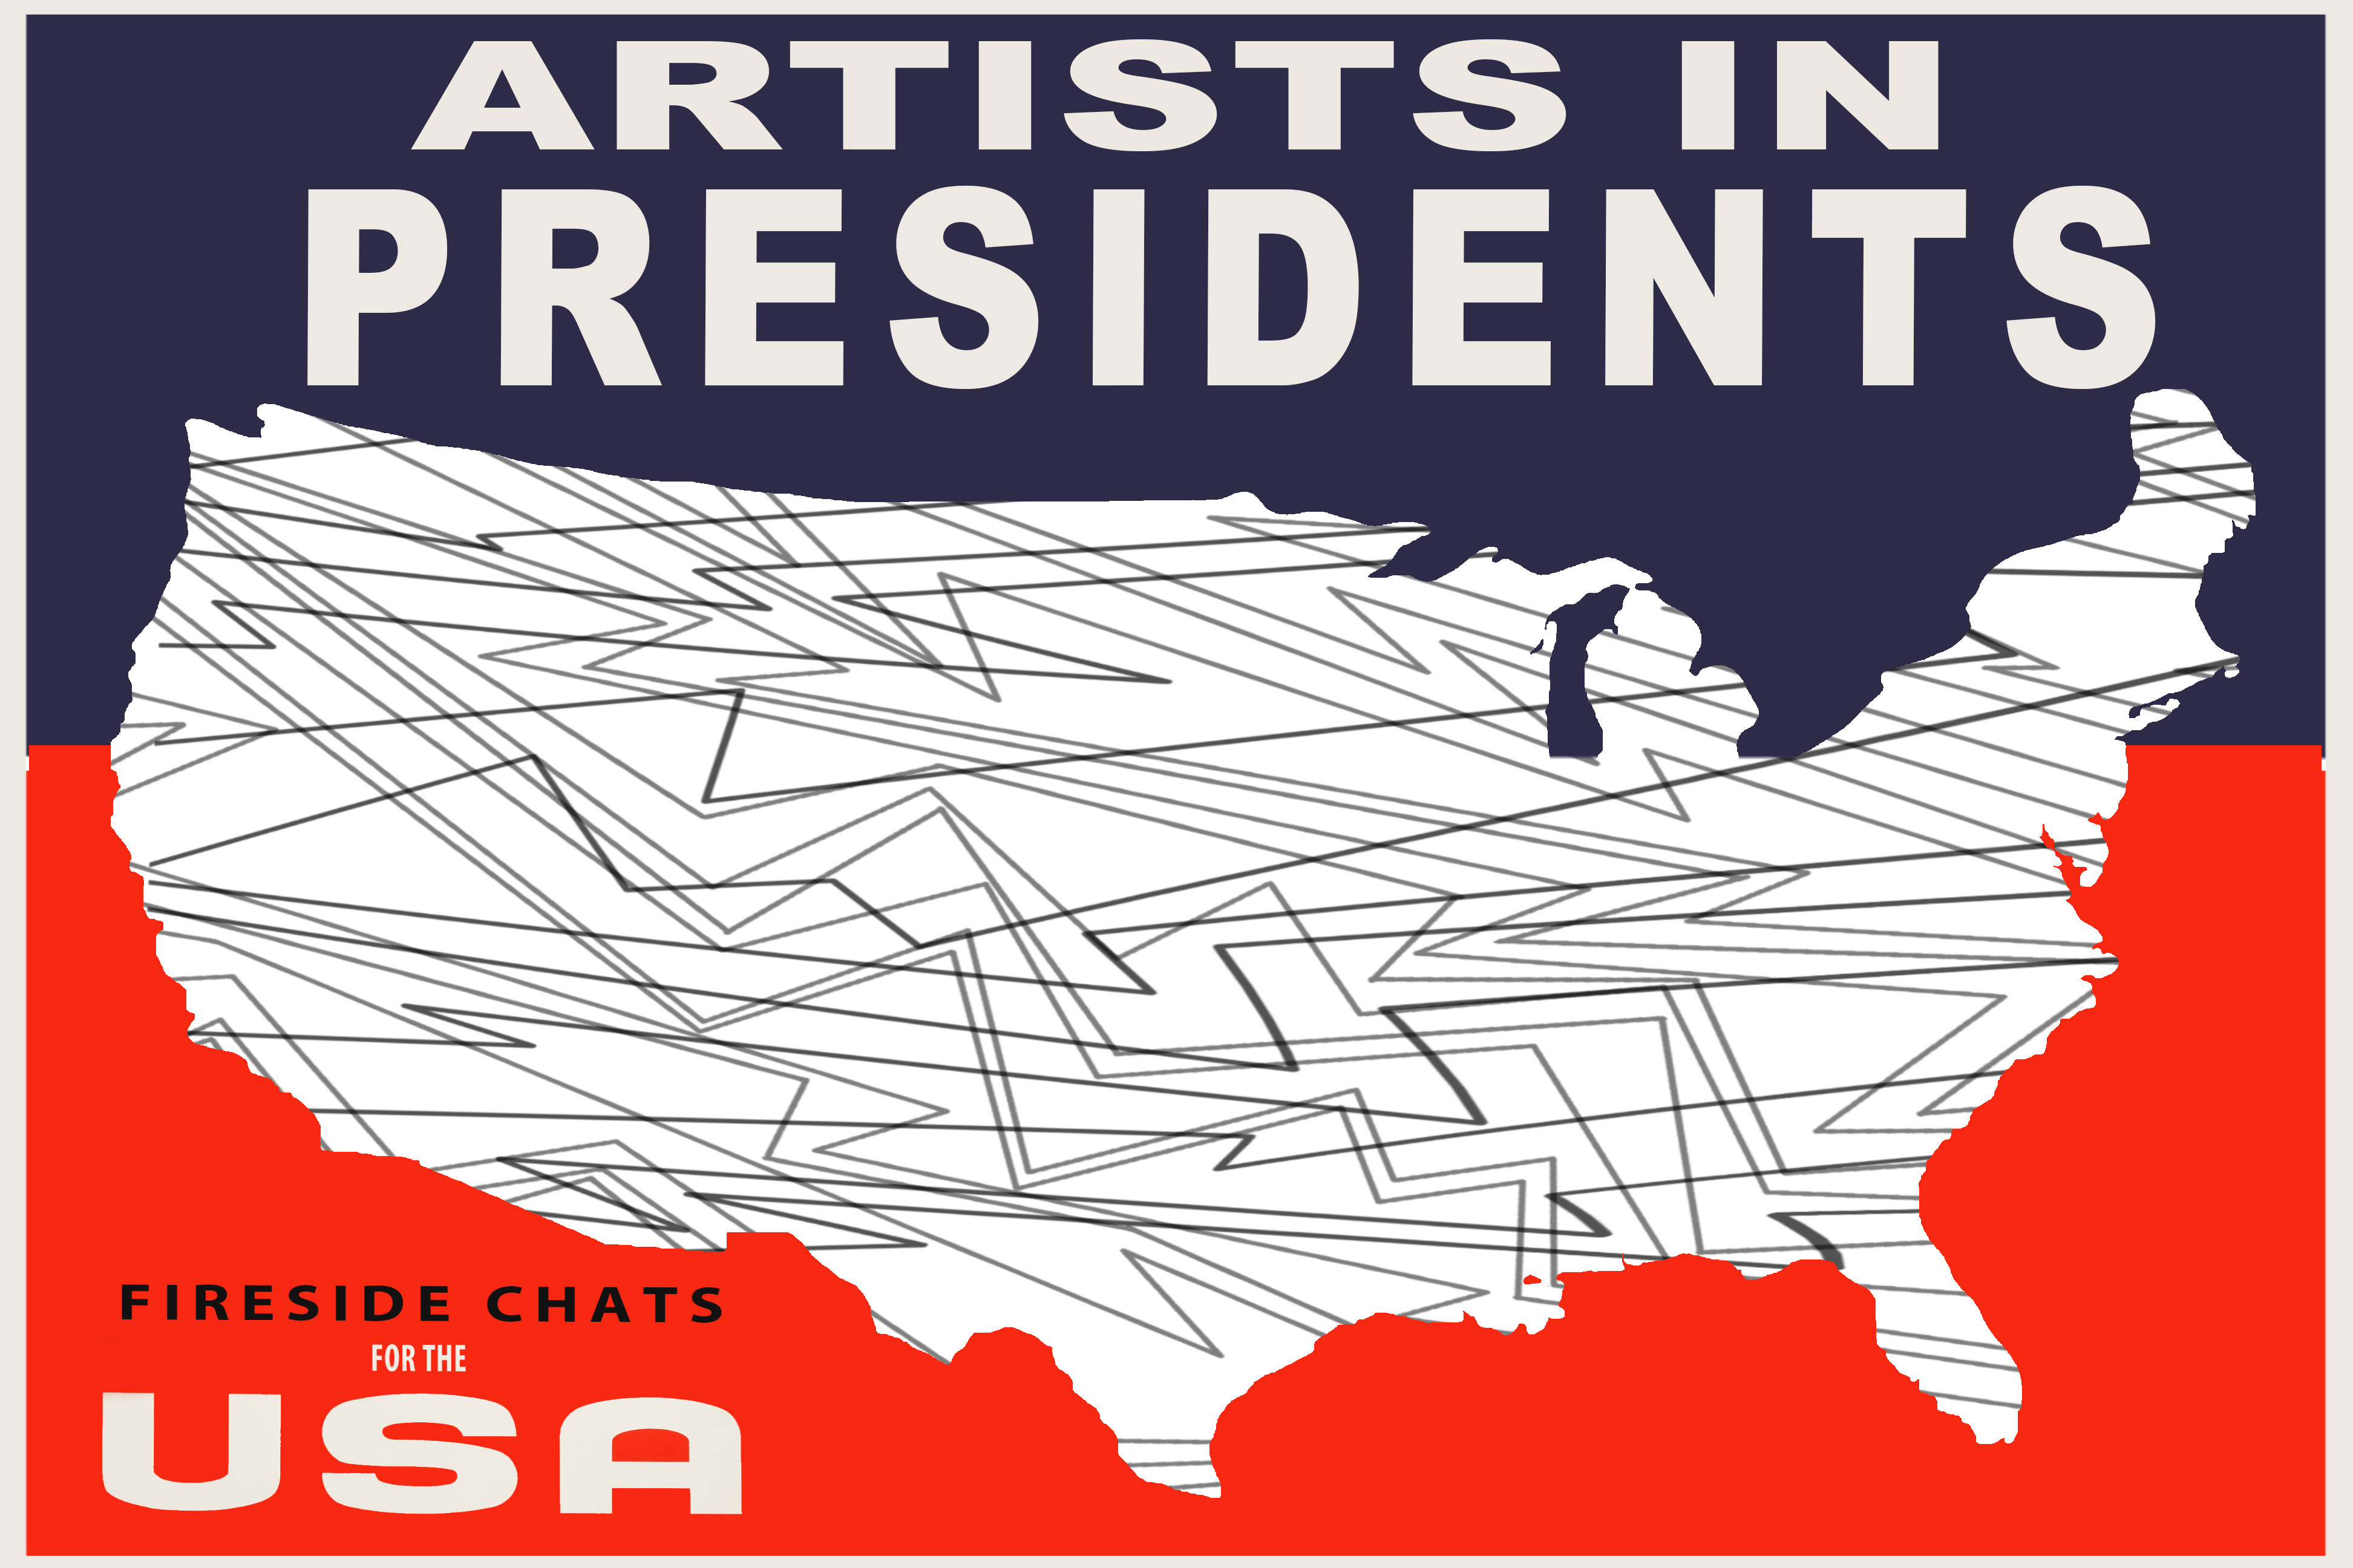 CAP UCLA Presents Constance Hockaday's ARTISTS-IN-PRESIDENTS: FIRESIDE CHATS FOR 2020 